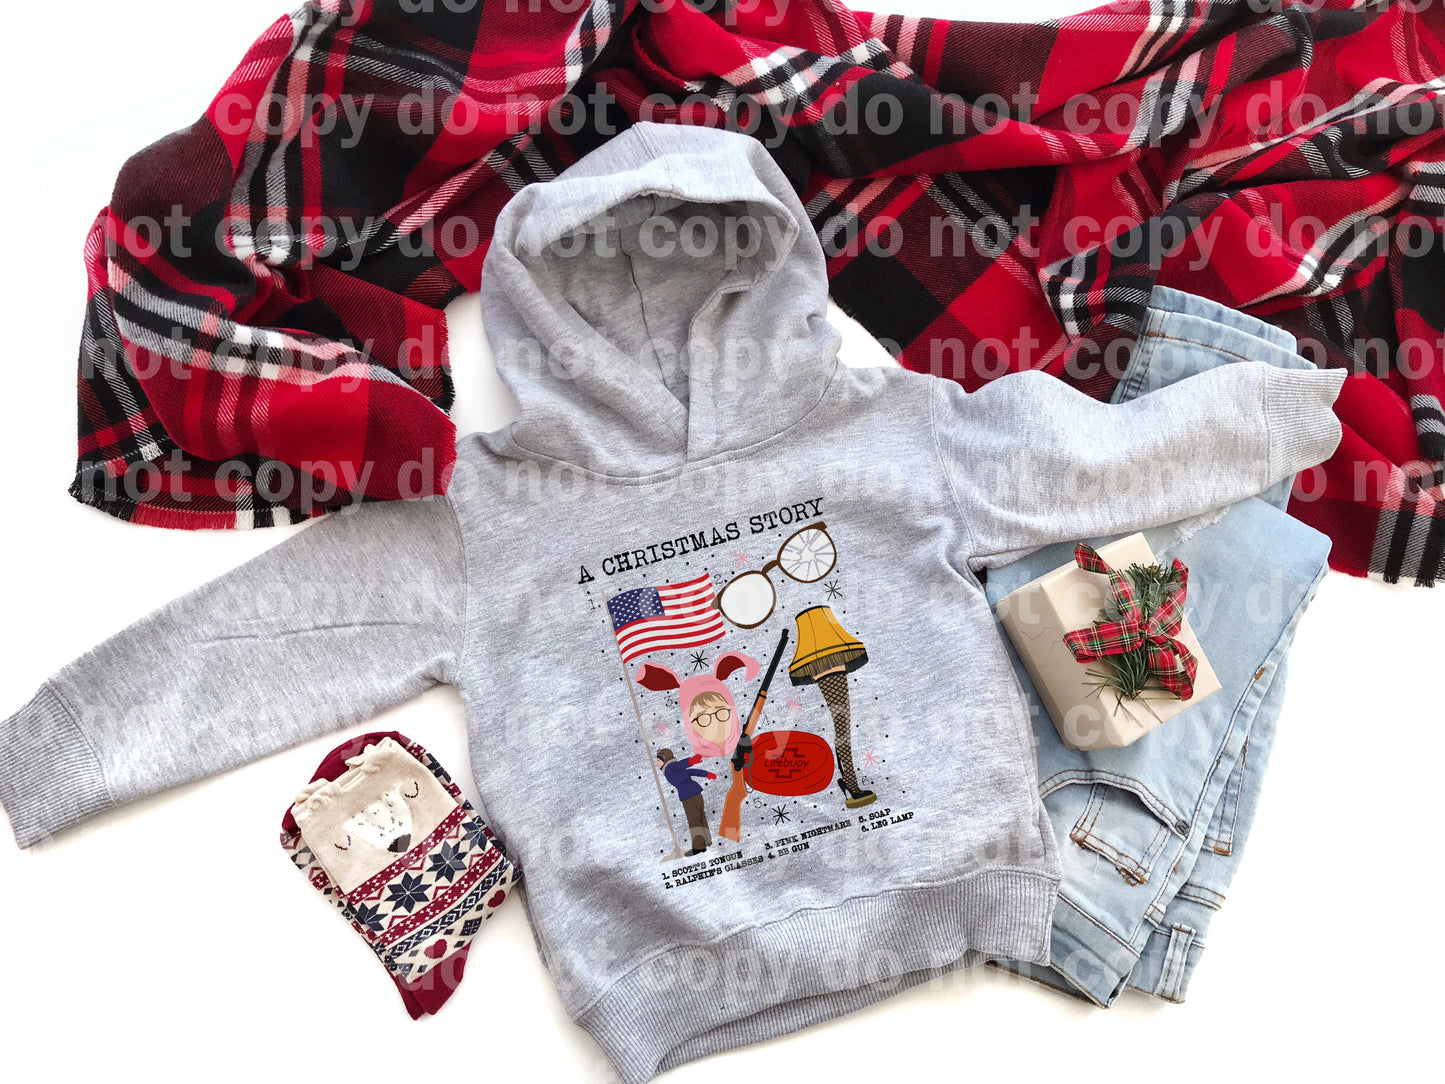 A Christmas Story Dream Print or Sublimation Print